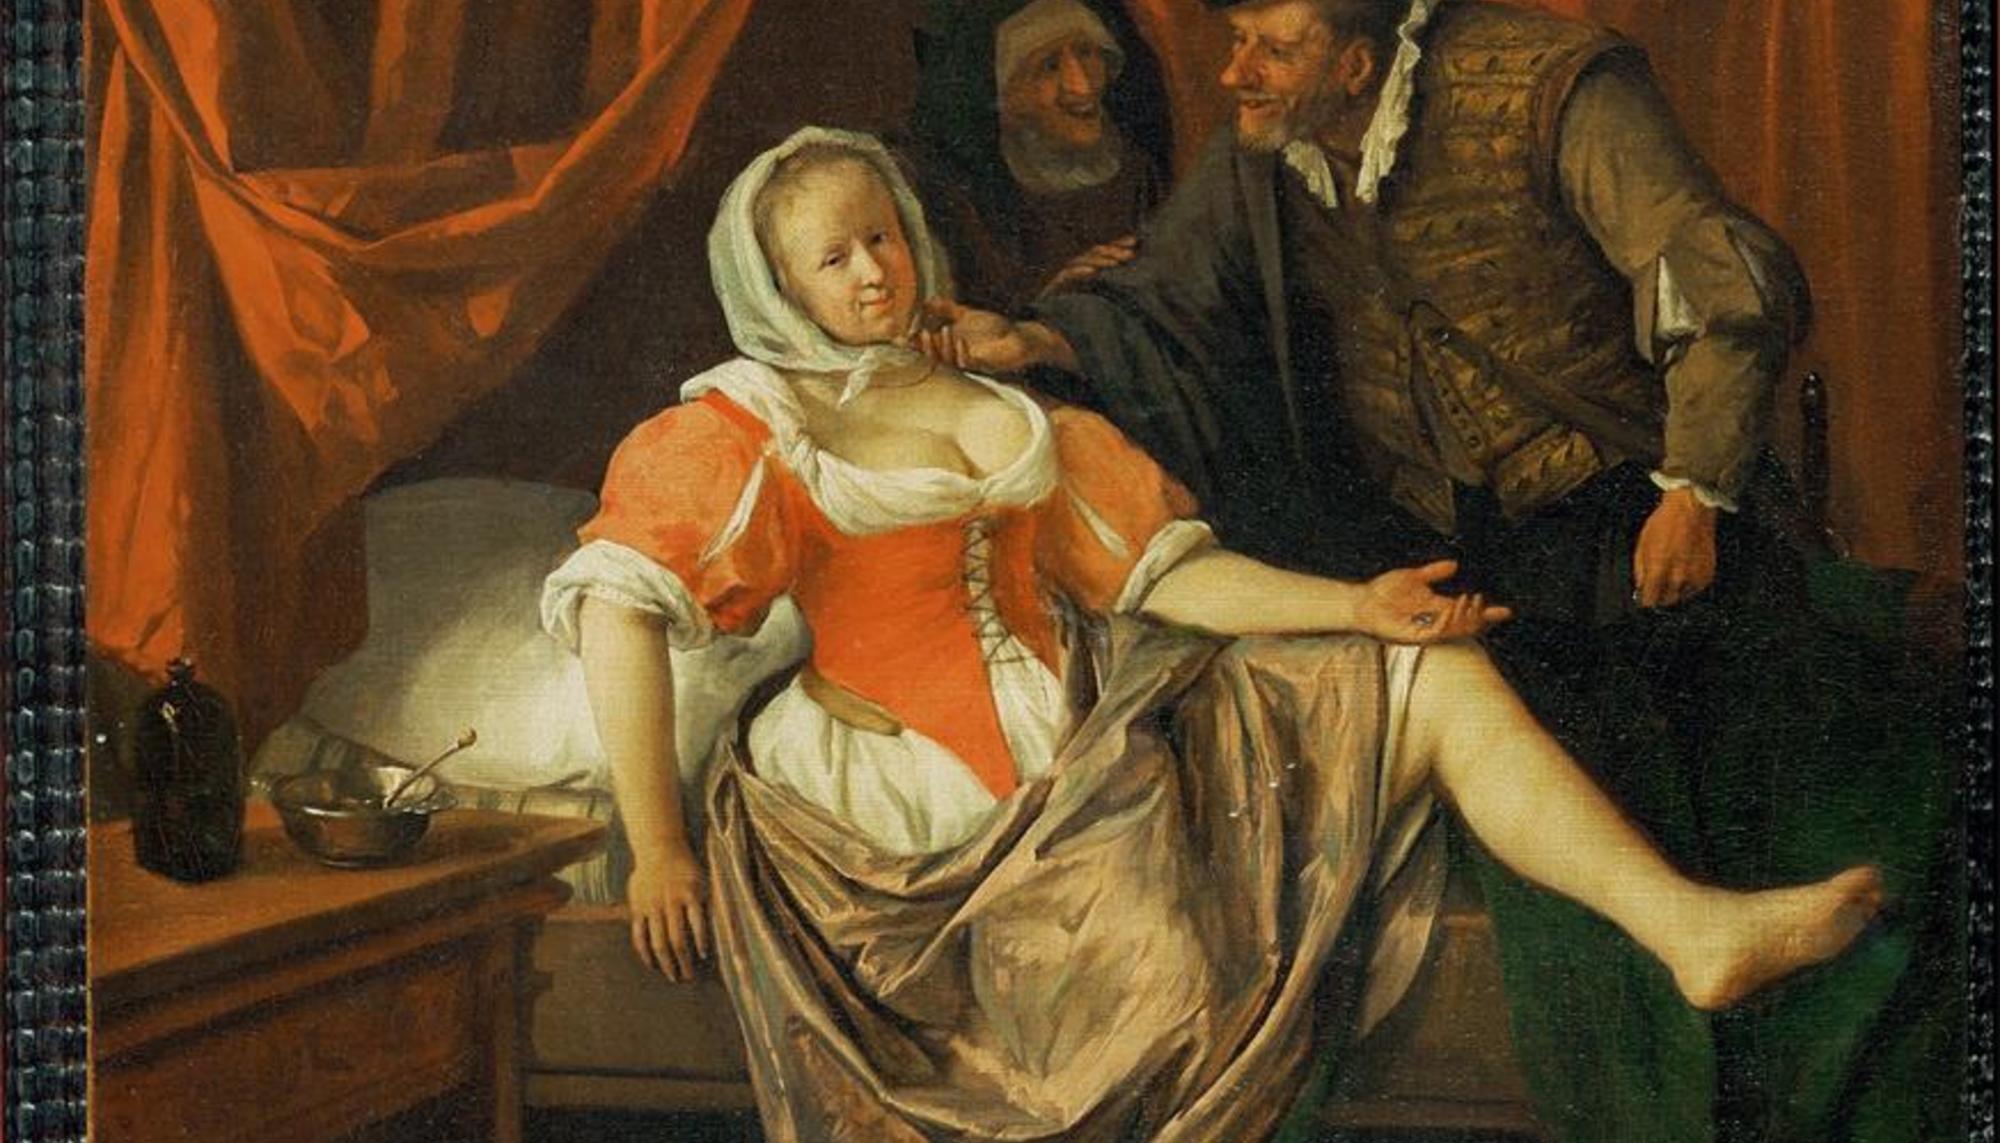 The Wench, c.1660-62, oil on canvas, 40 x 36.2 cm